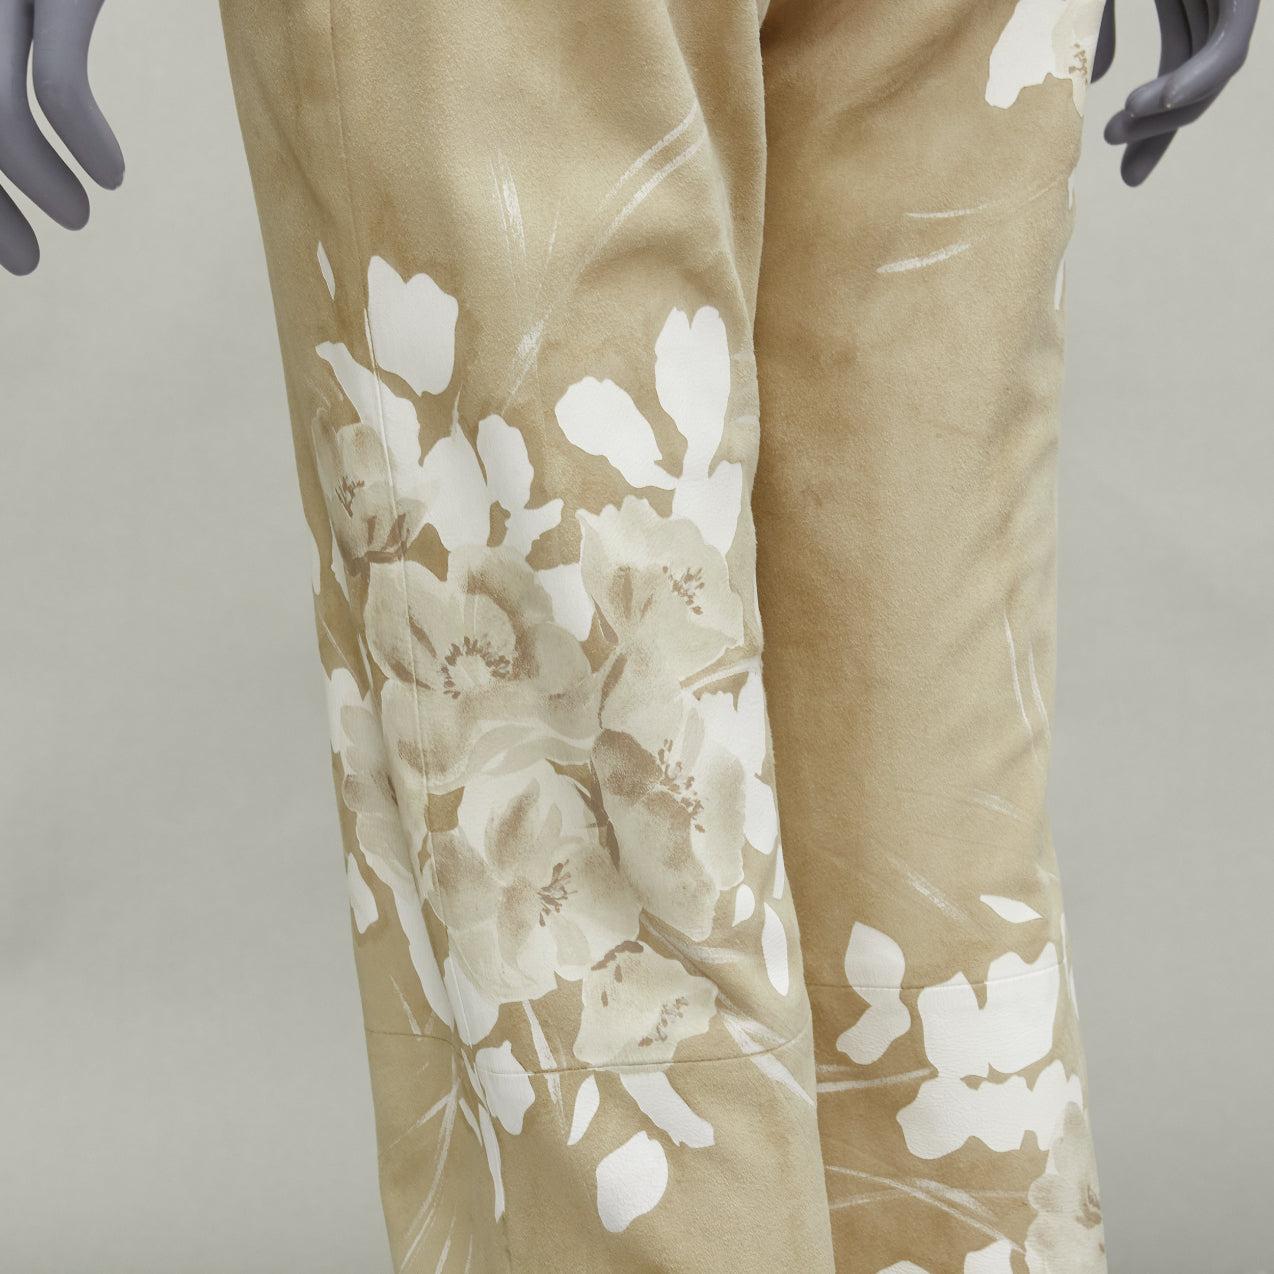 VALENTINO Vintage beige hand painted floral lambskin suede leather pants UK6 XS
Reference: TGAS/D00983
Brand: Valentino
Material: Lambskin Leather
Color: Beige, Cream
Pattern: Floral
Closure: Zip
Lining: Beige Fabric
Extra Details: Hand painted